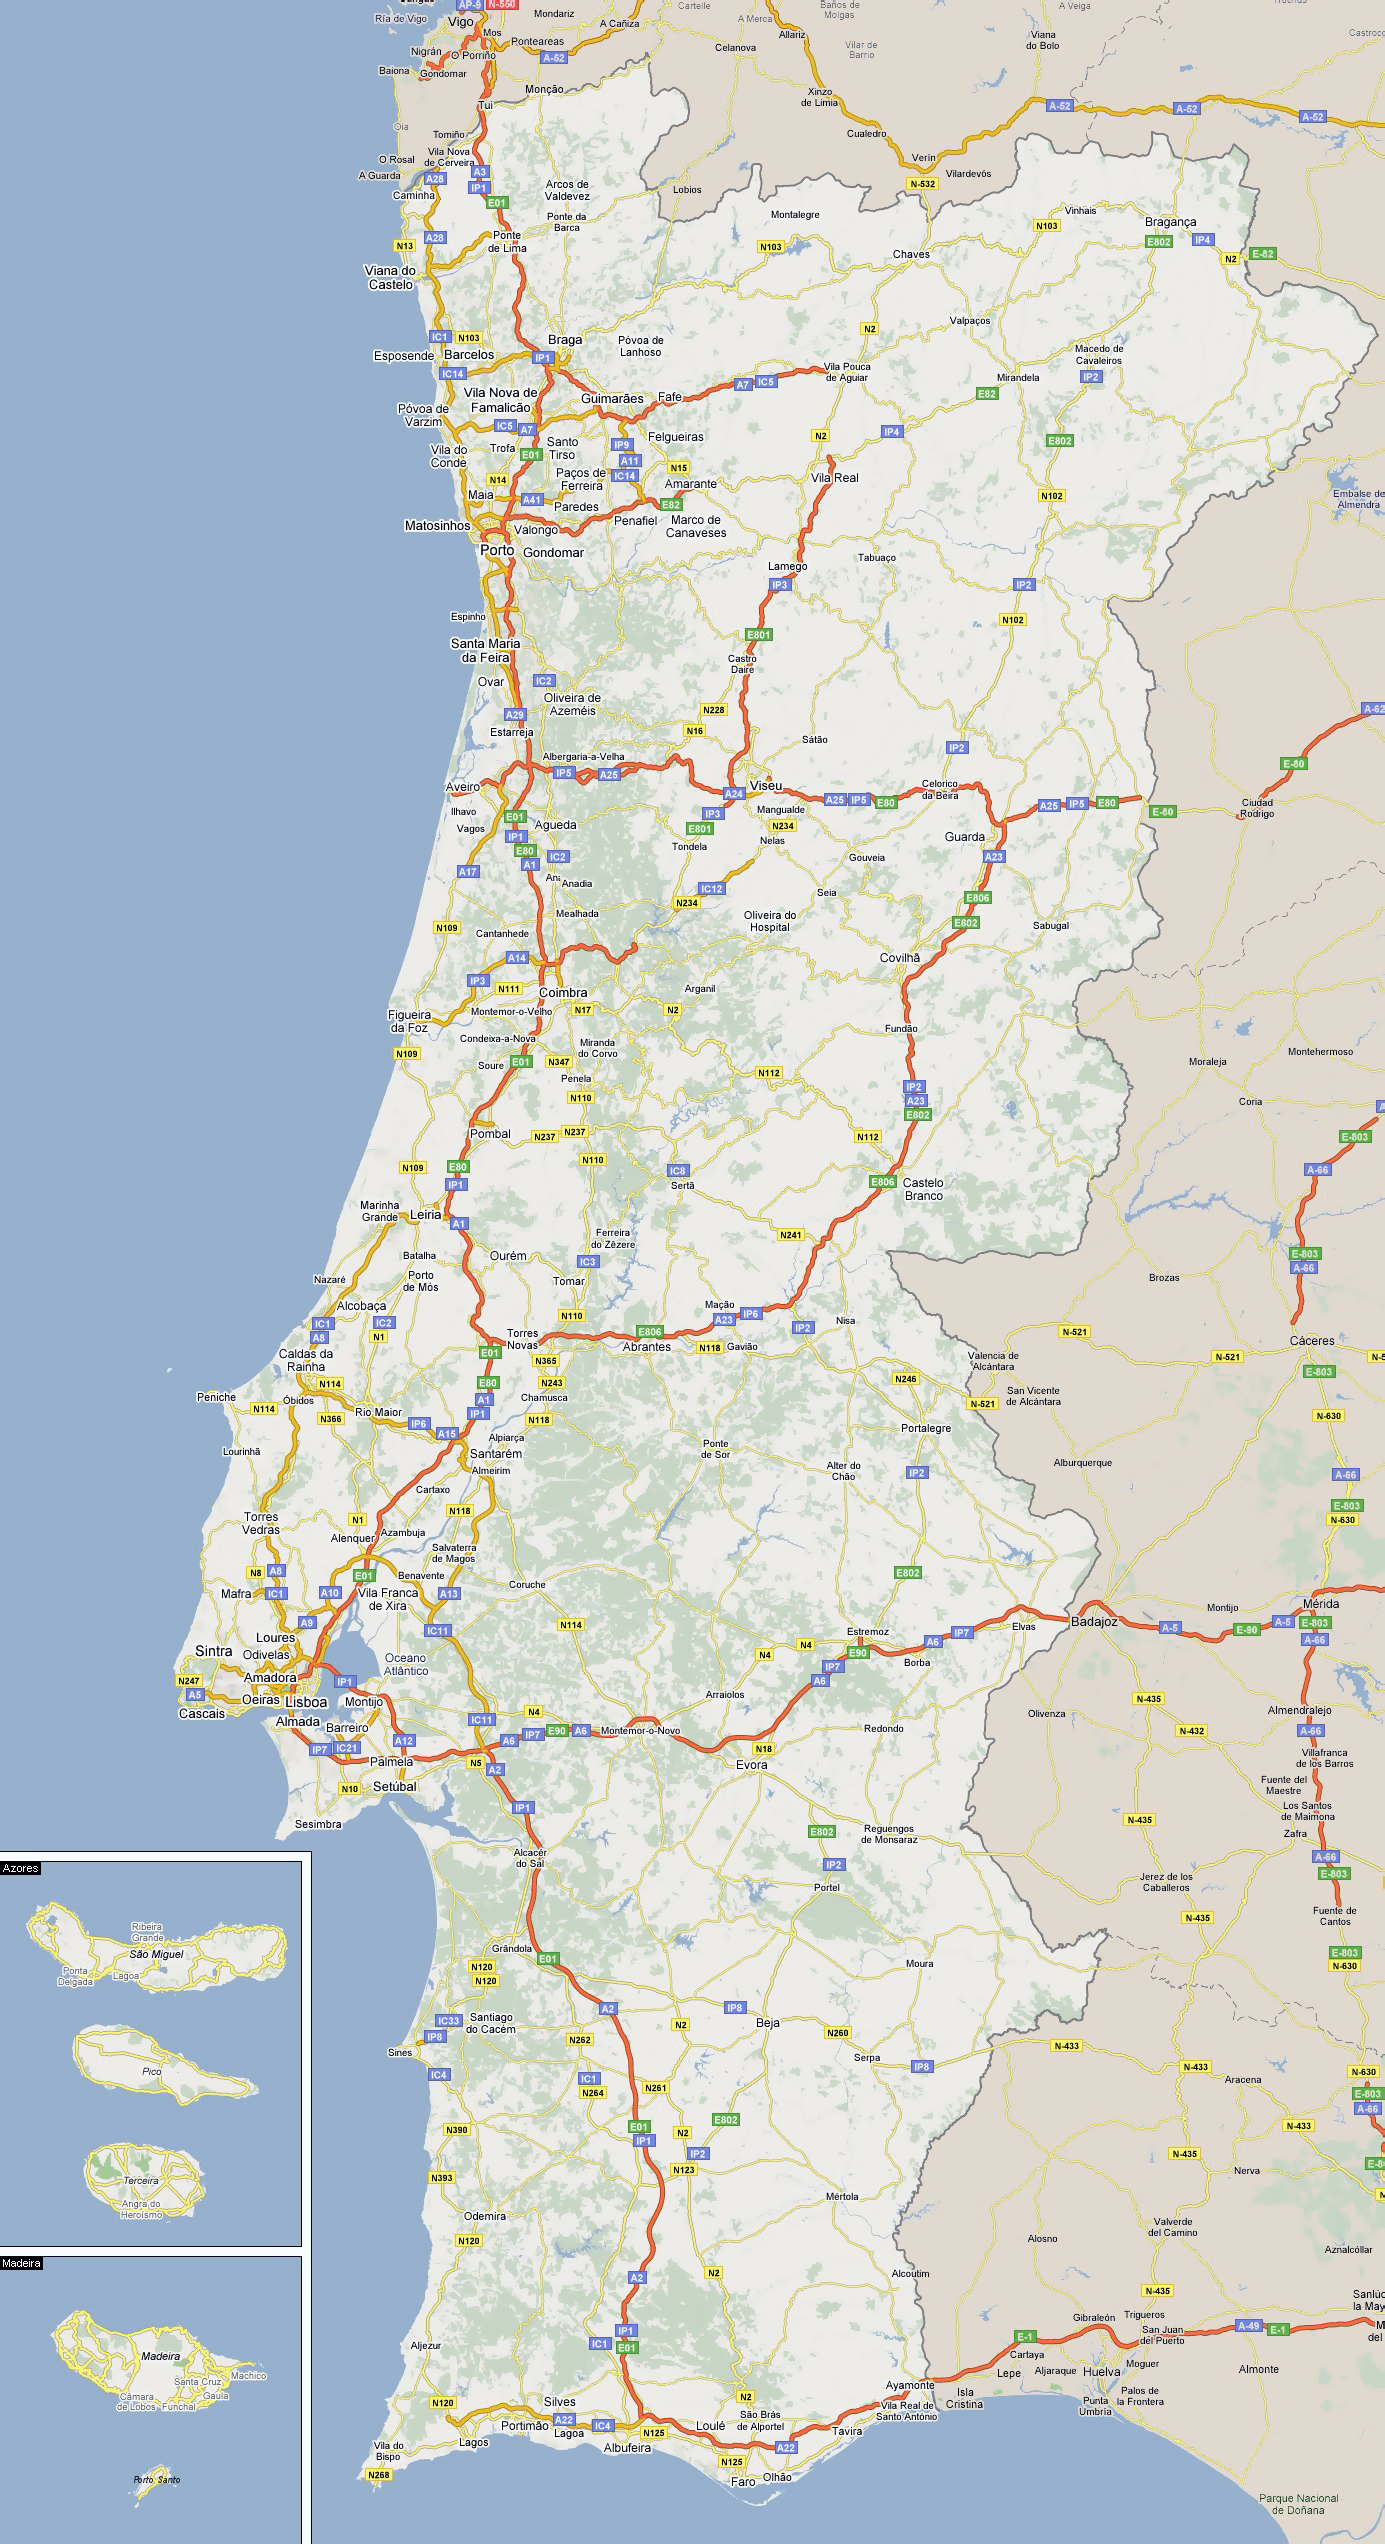 Large road map of Portugal with cities, Portugal, Europe, Mapsland